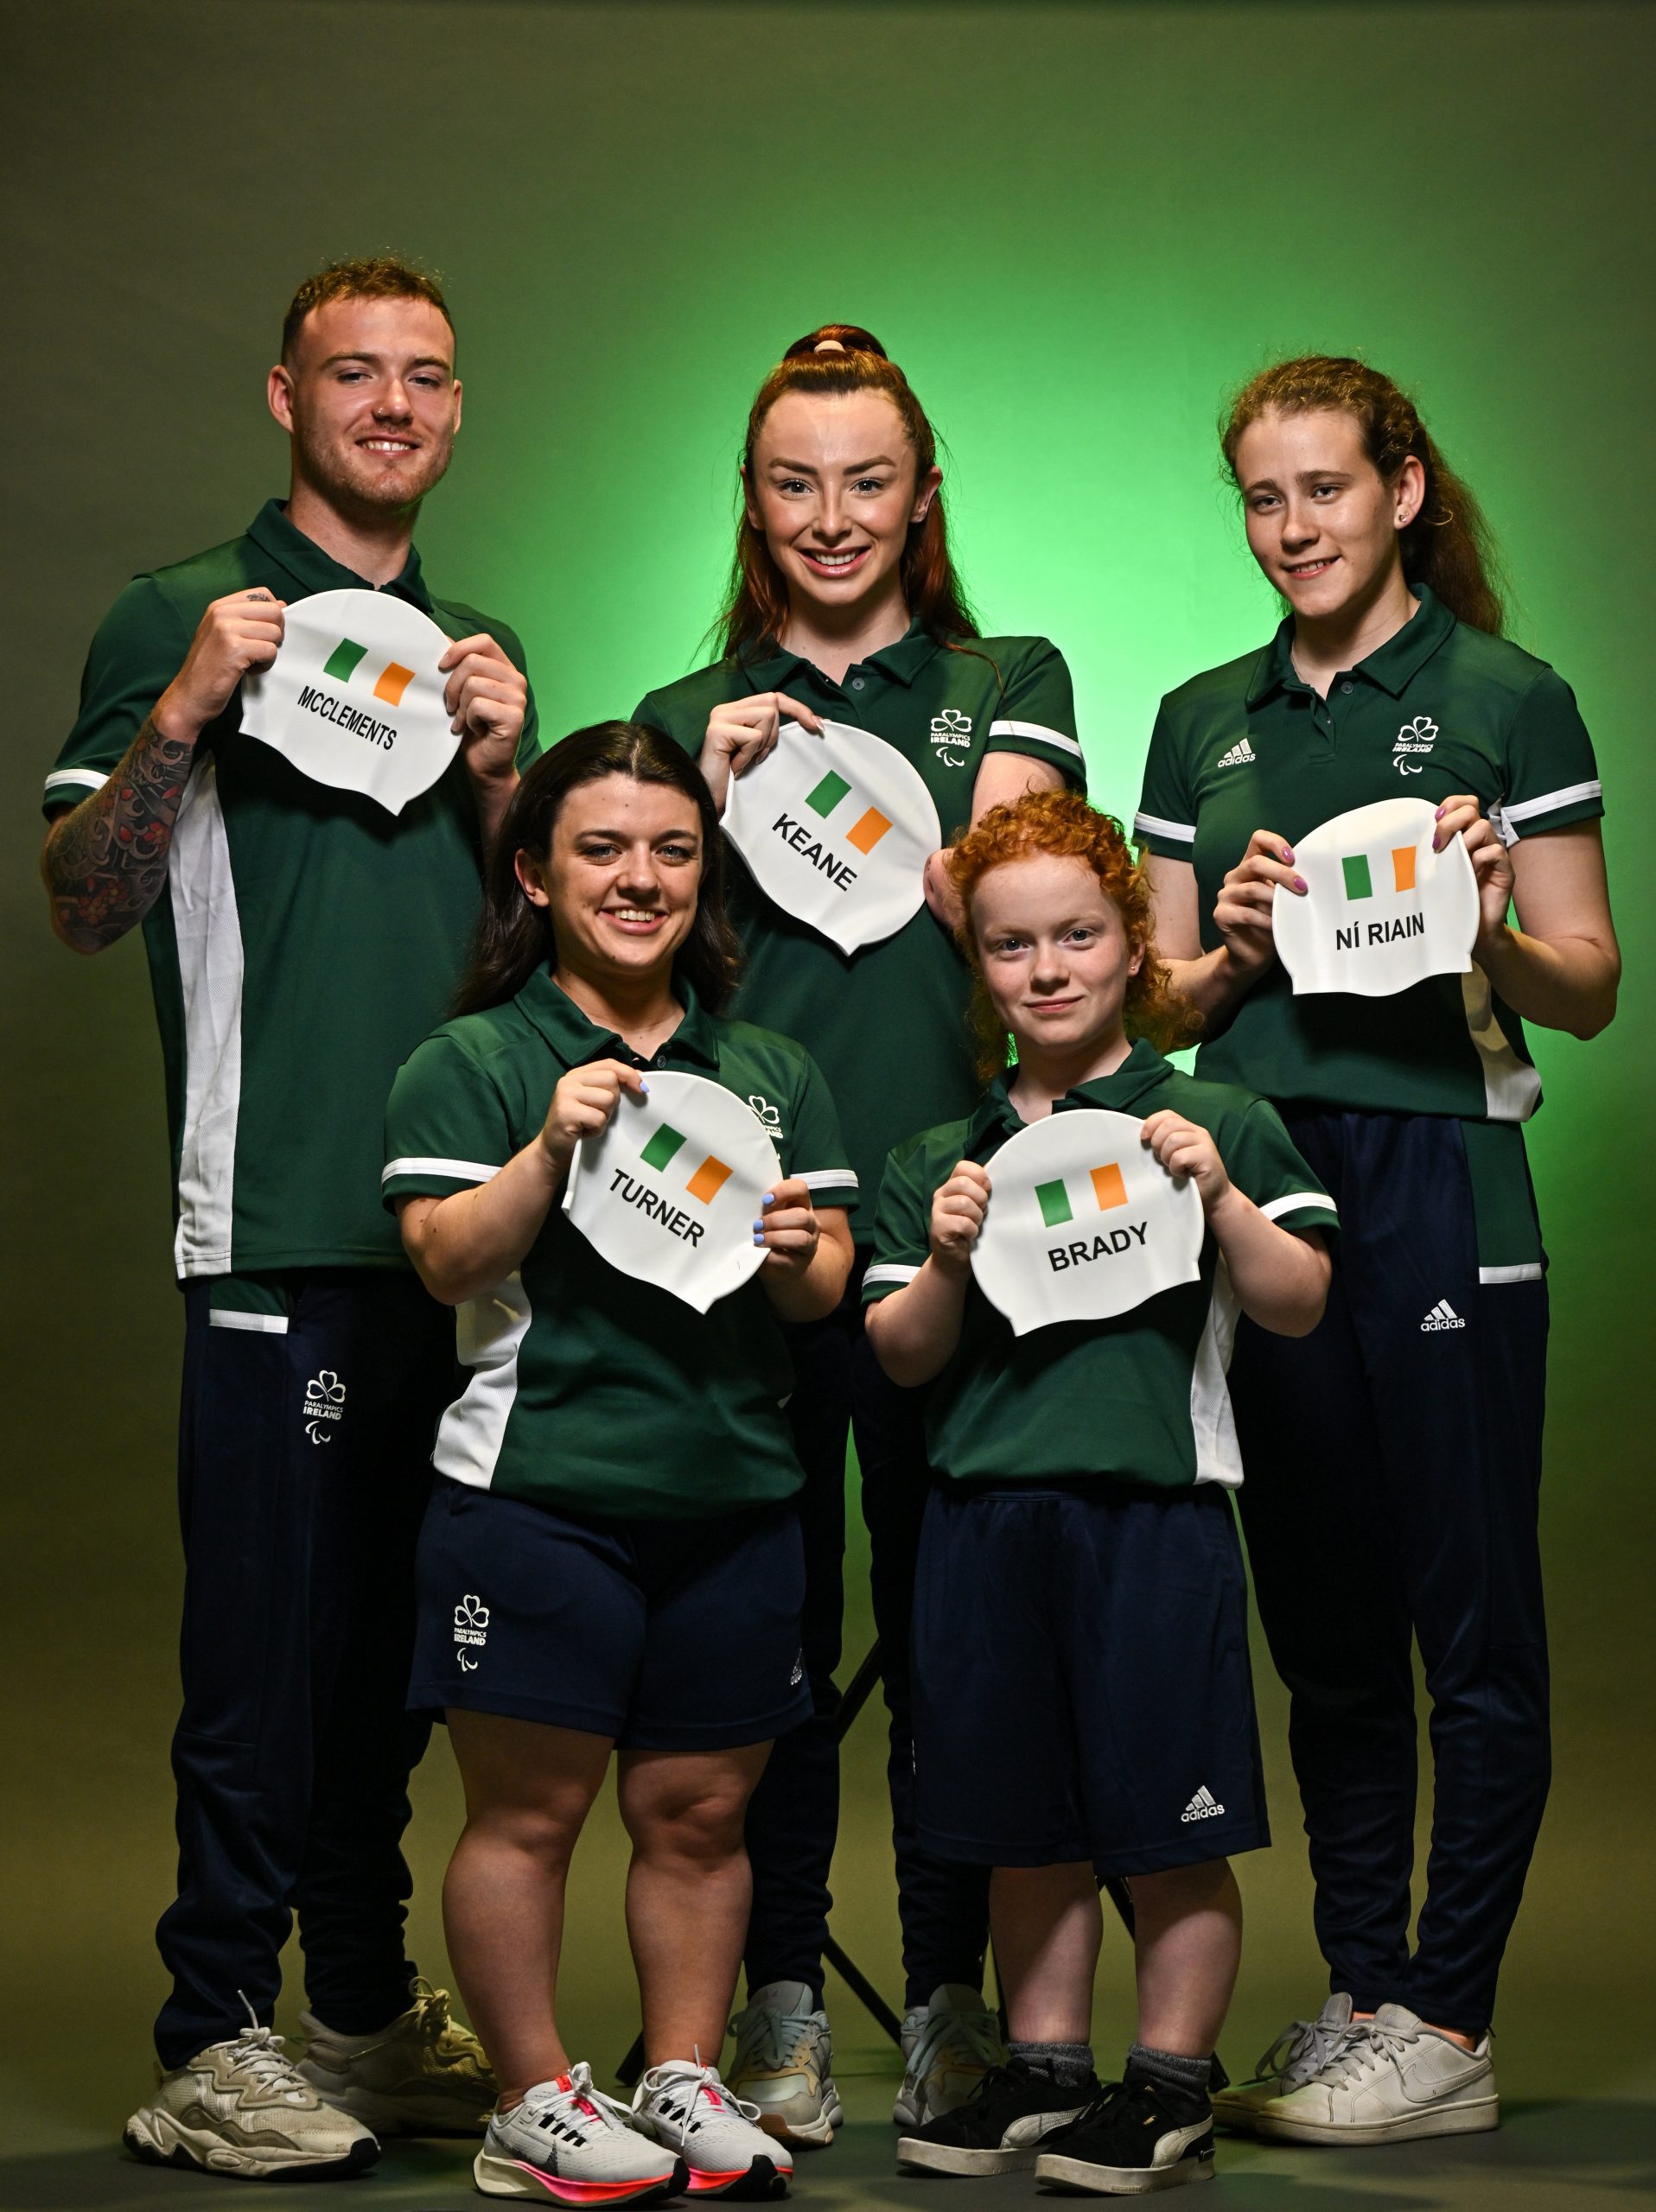 22 June 2023; In attendance during a Paralympics Ireland Swimming Team announcement at the Sport Ireland Institute in Dublin are swimmers, from left, Barry McClements, Nicole Turner, Ellen Keane, Dearbhaile Brady and Roisin Ní Riain. Photo by Sam Barnes/Sportsfile *** NO REPRODUCTION FEE ***